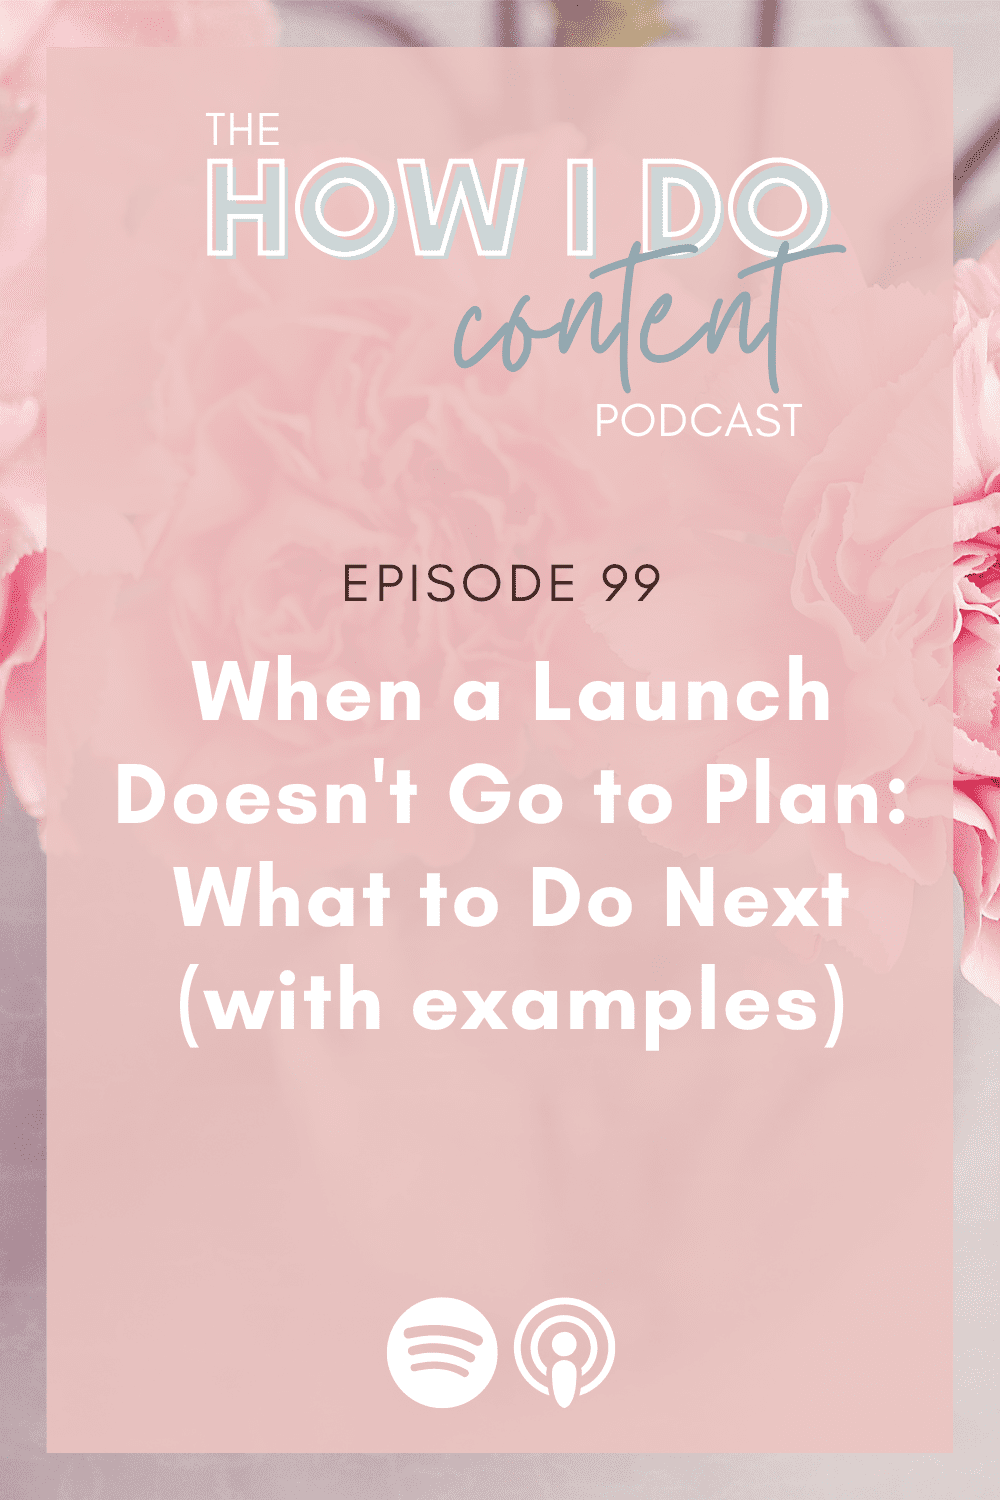 When a Launch Doesn't Go to Plan: What to Do Next (with examples)